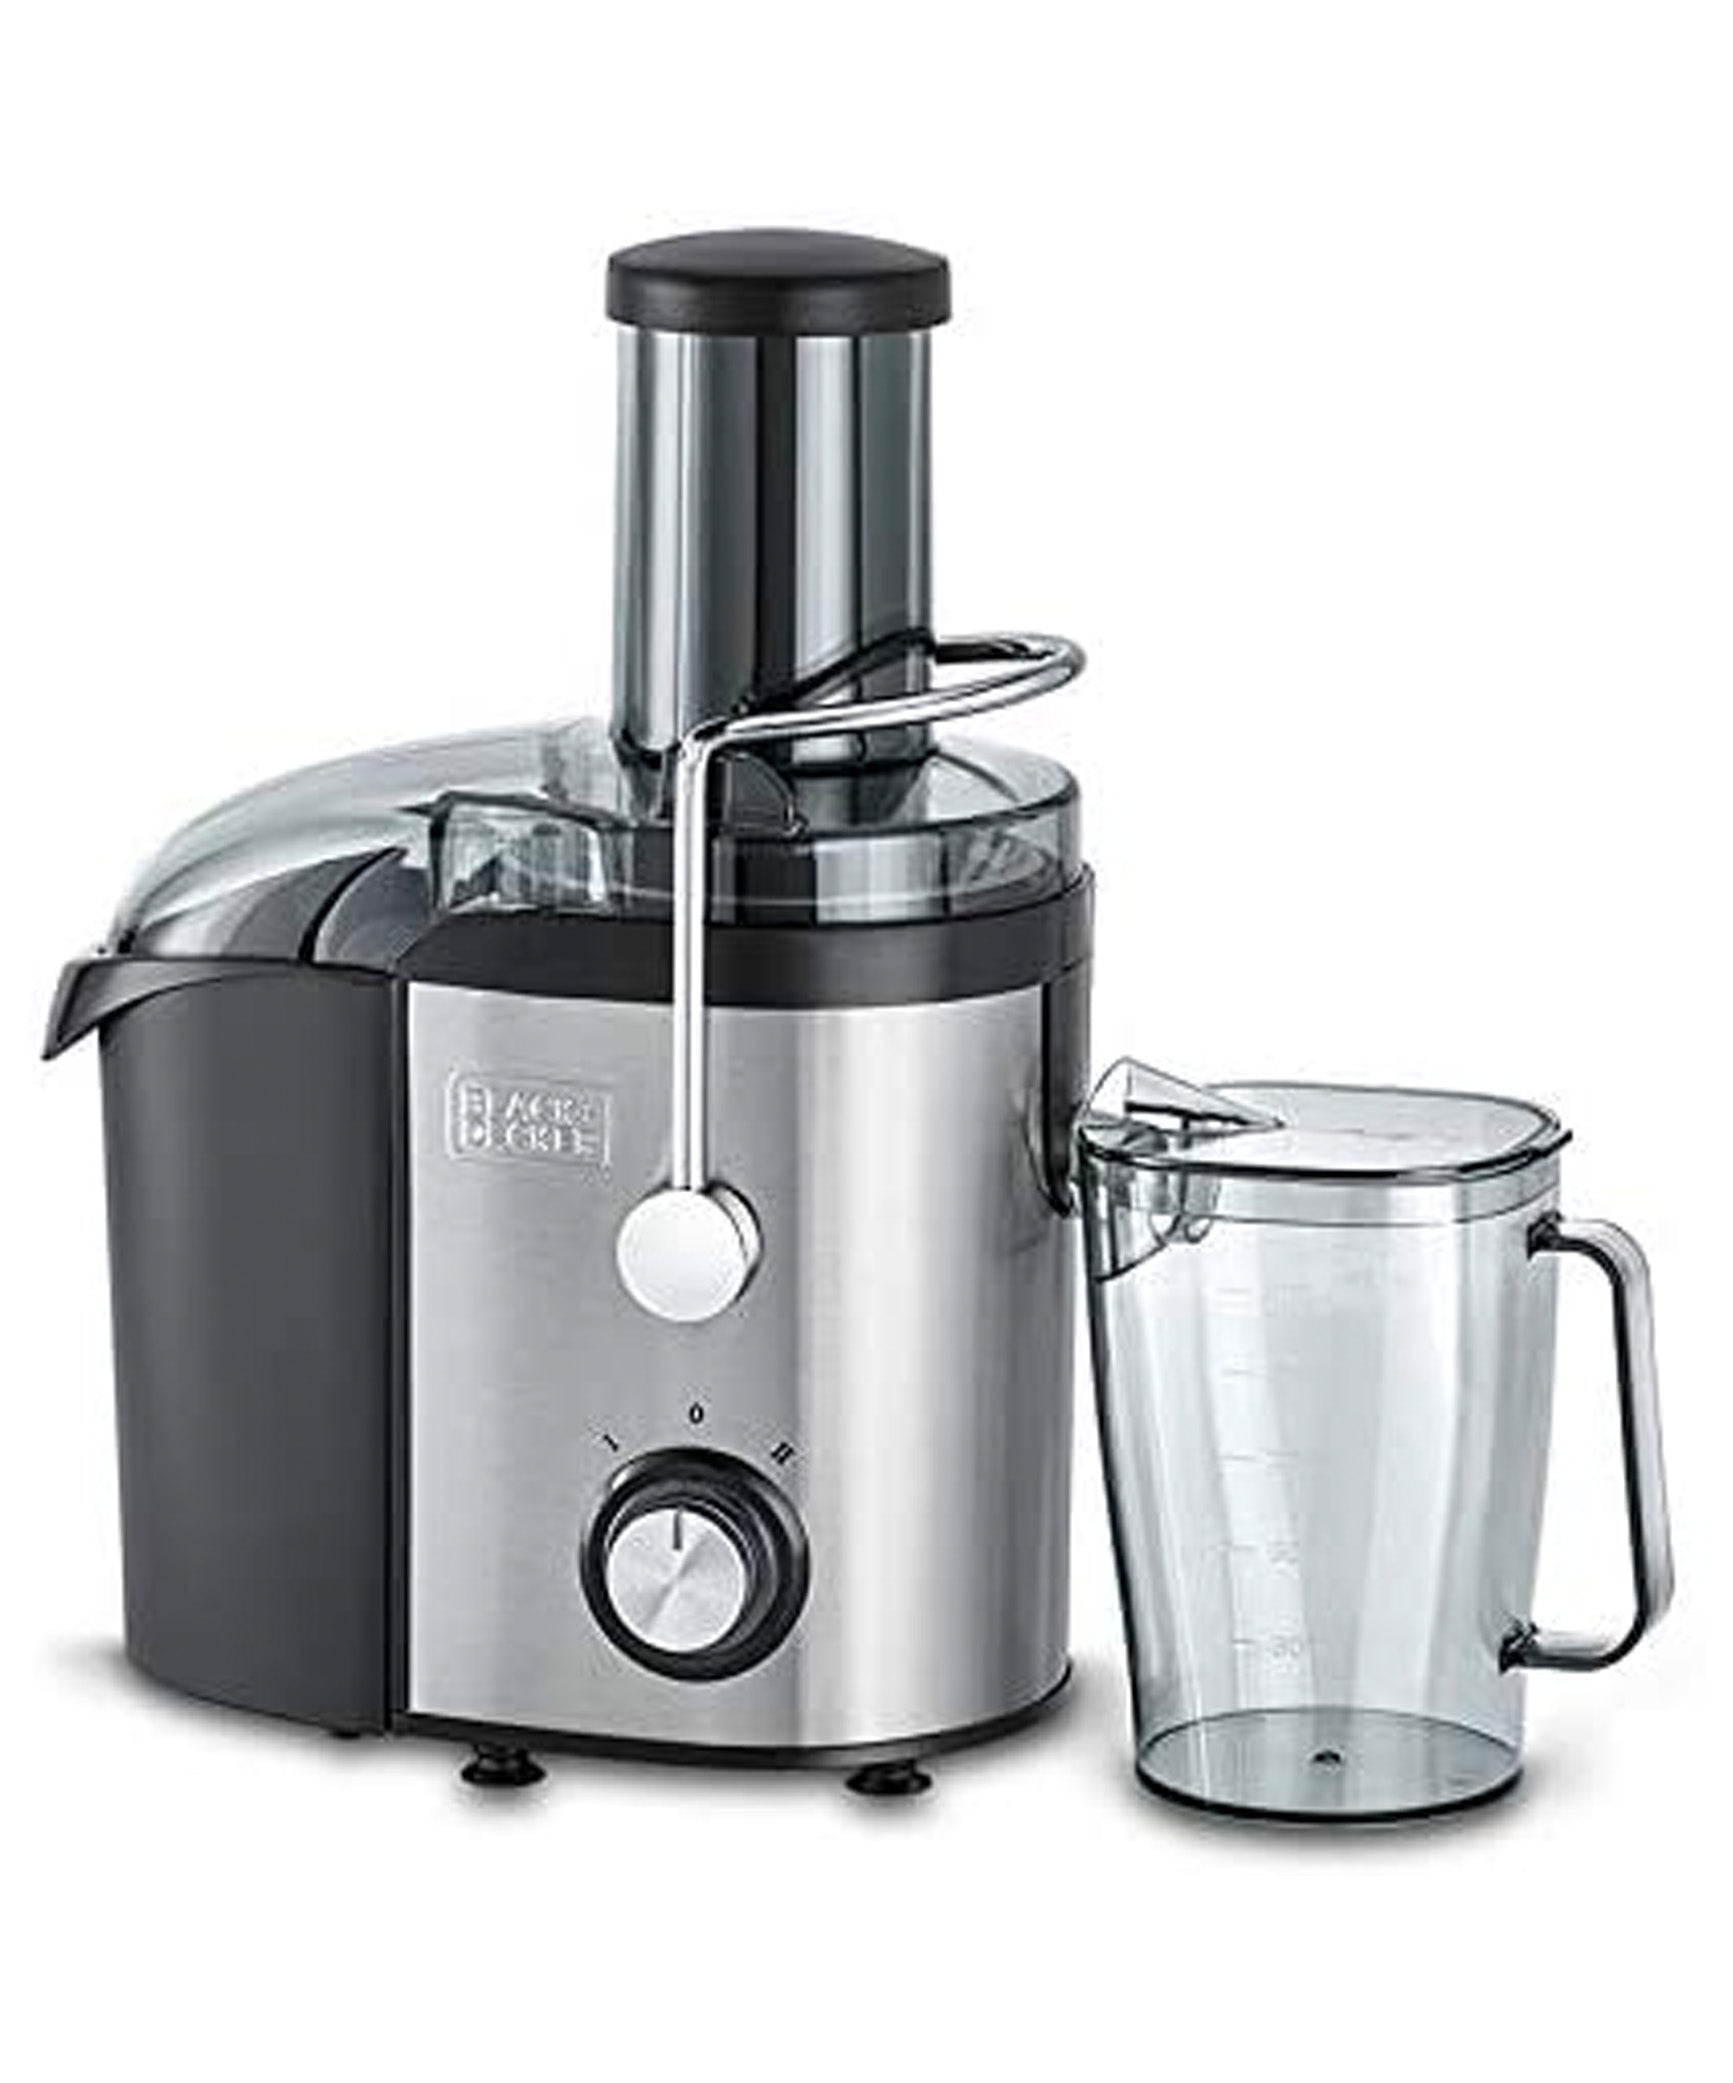 Black+Decker, 800W 1.7L Stainles Steel XL Juicer Extractor with Juice Collector Silver/Black, JE800-B5